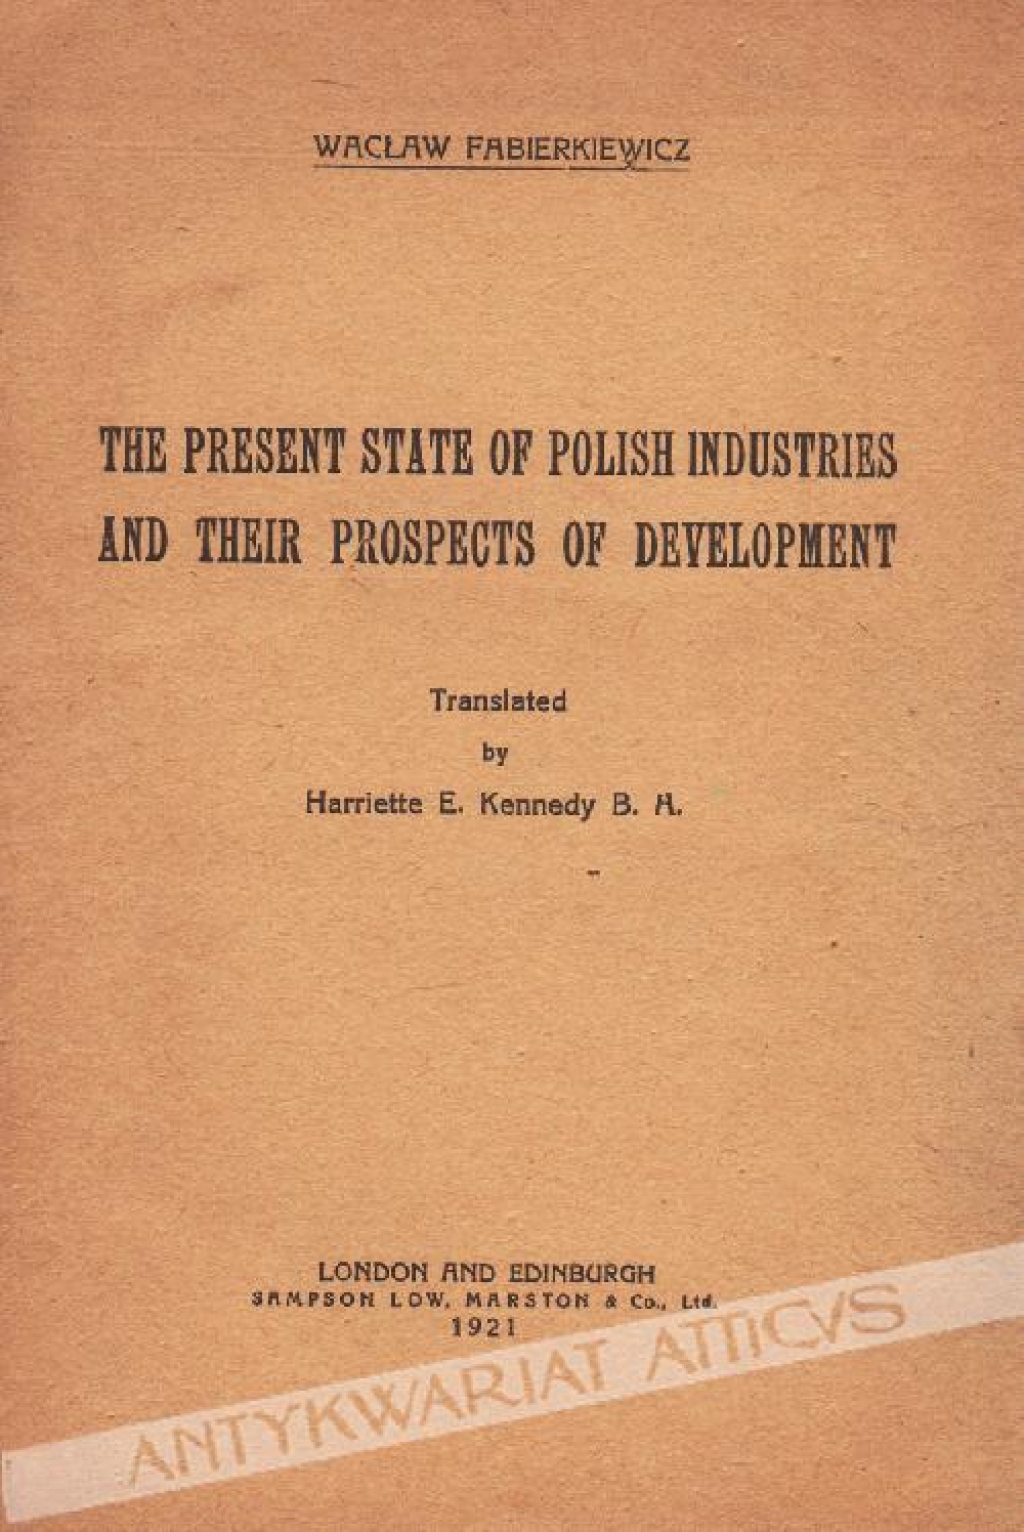 The present state of Polish industries and their prospects of development